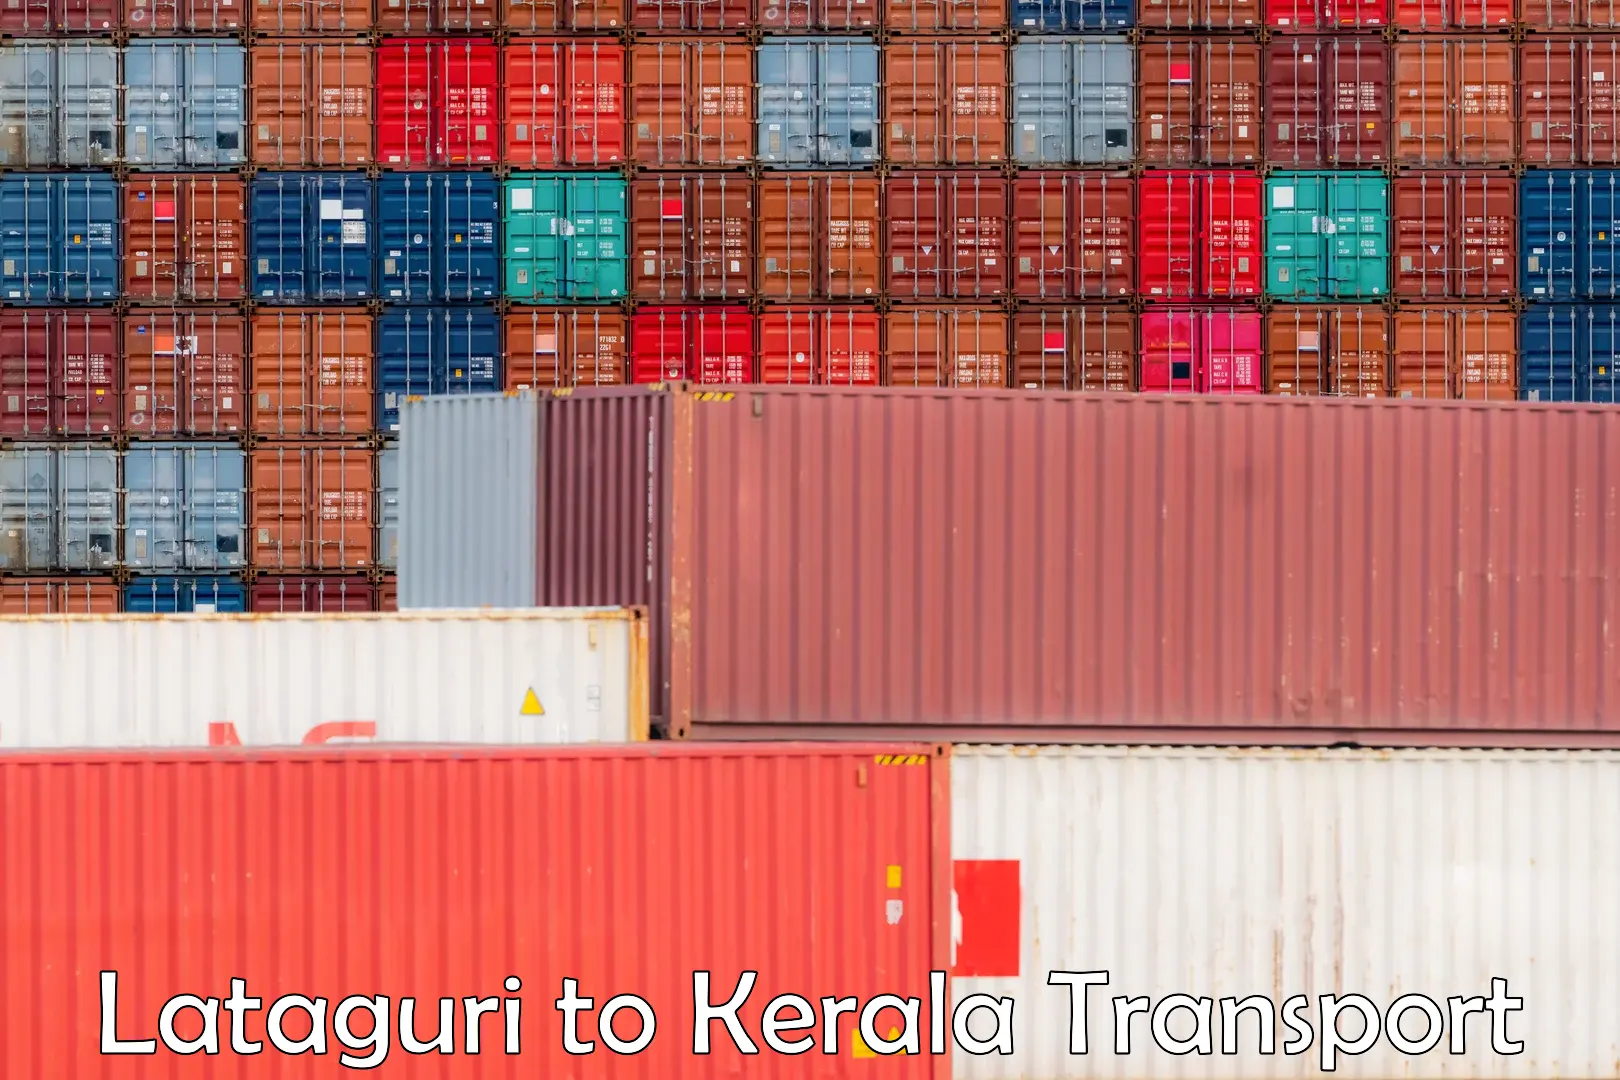 Goods delivery service Lataguri to Kerala